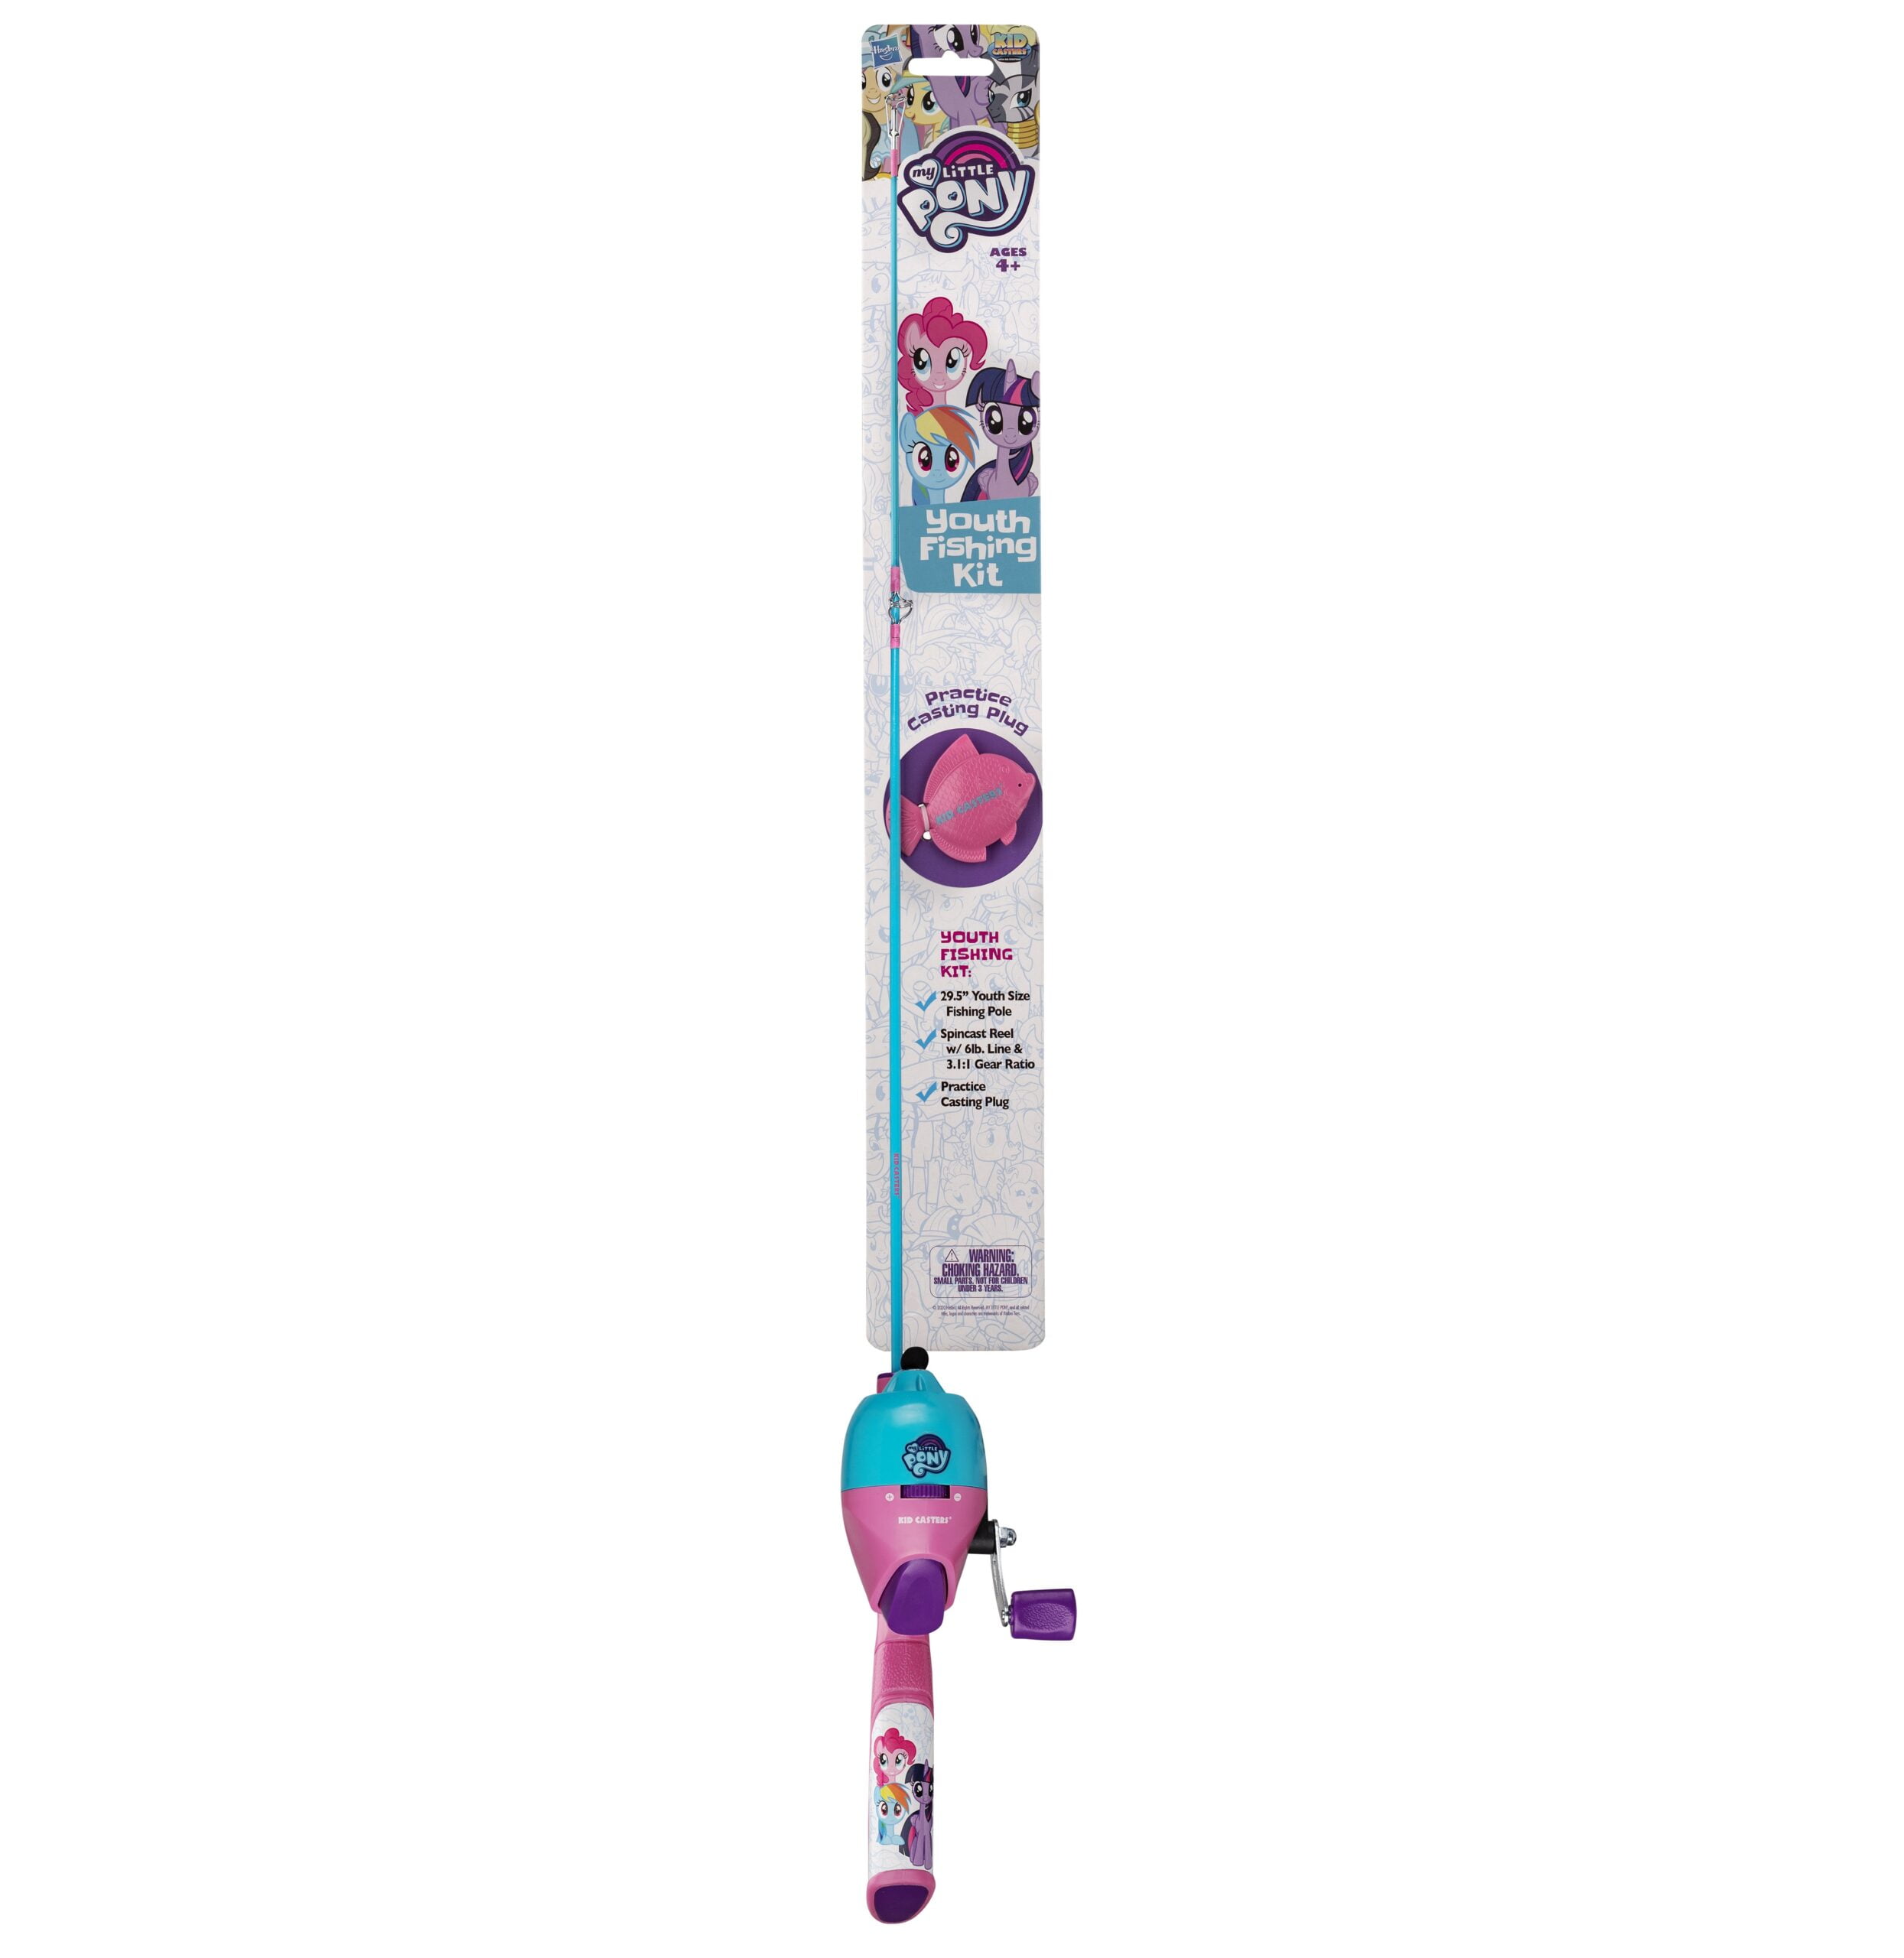 Kid Casters My Little Pony Spincasting Fiberglass Rod and Spincasting Reel  Combo Kit